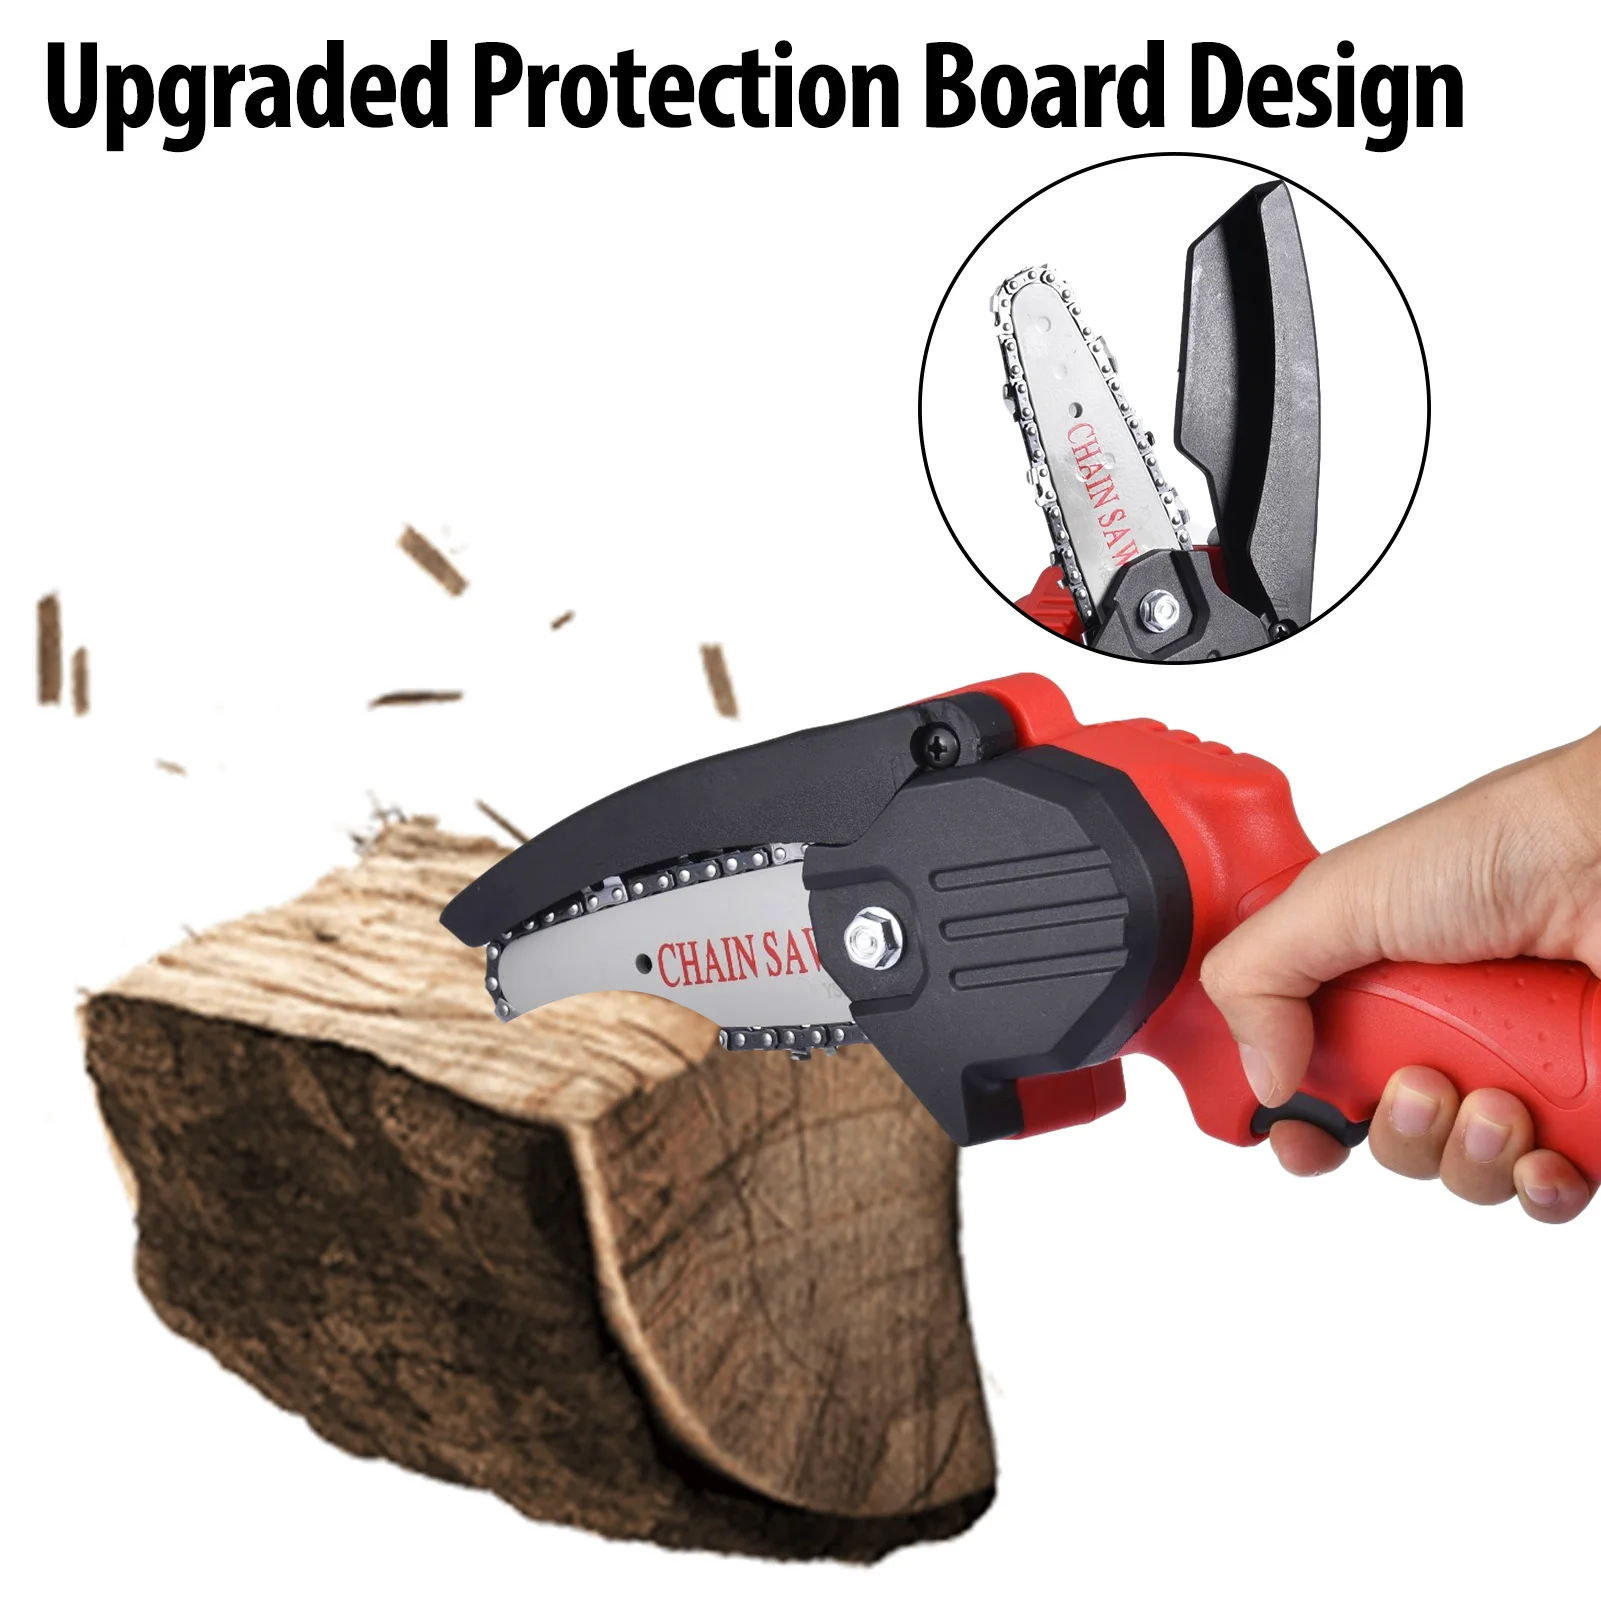 

Upgrade Mini Chainsaw Cordless One-handed Electric Saw With LED Illuminator Protective Bezel For Cutting Branches Wood